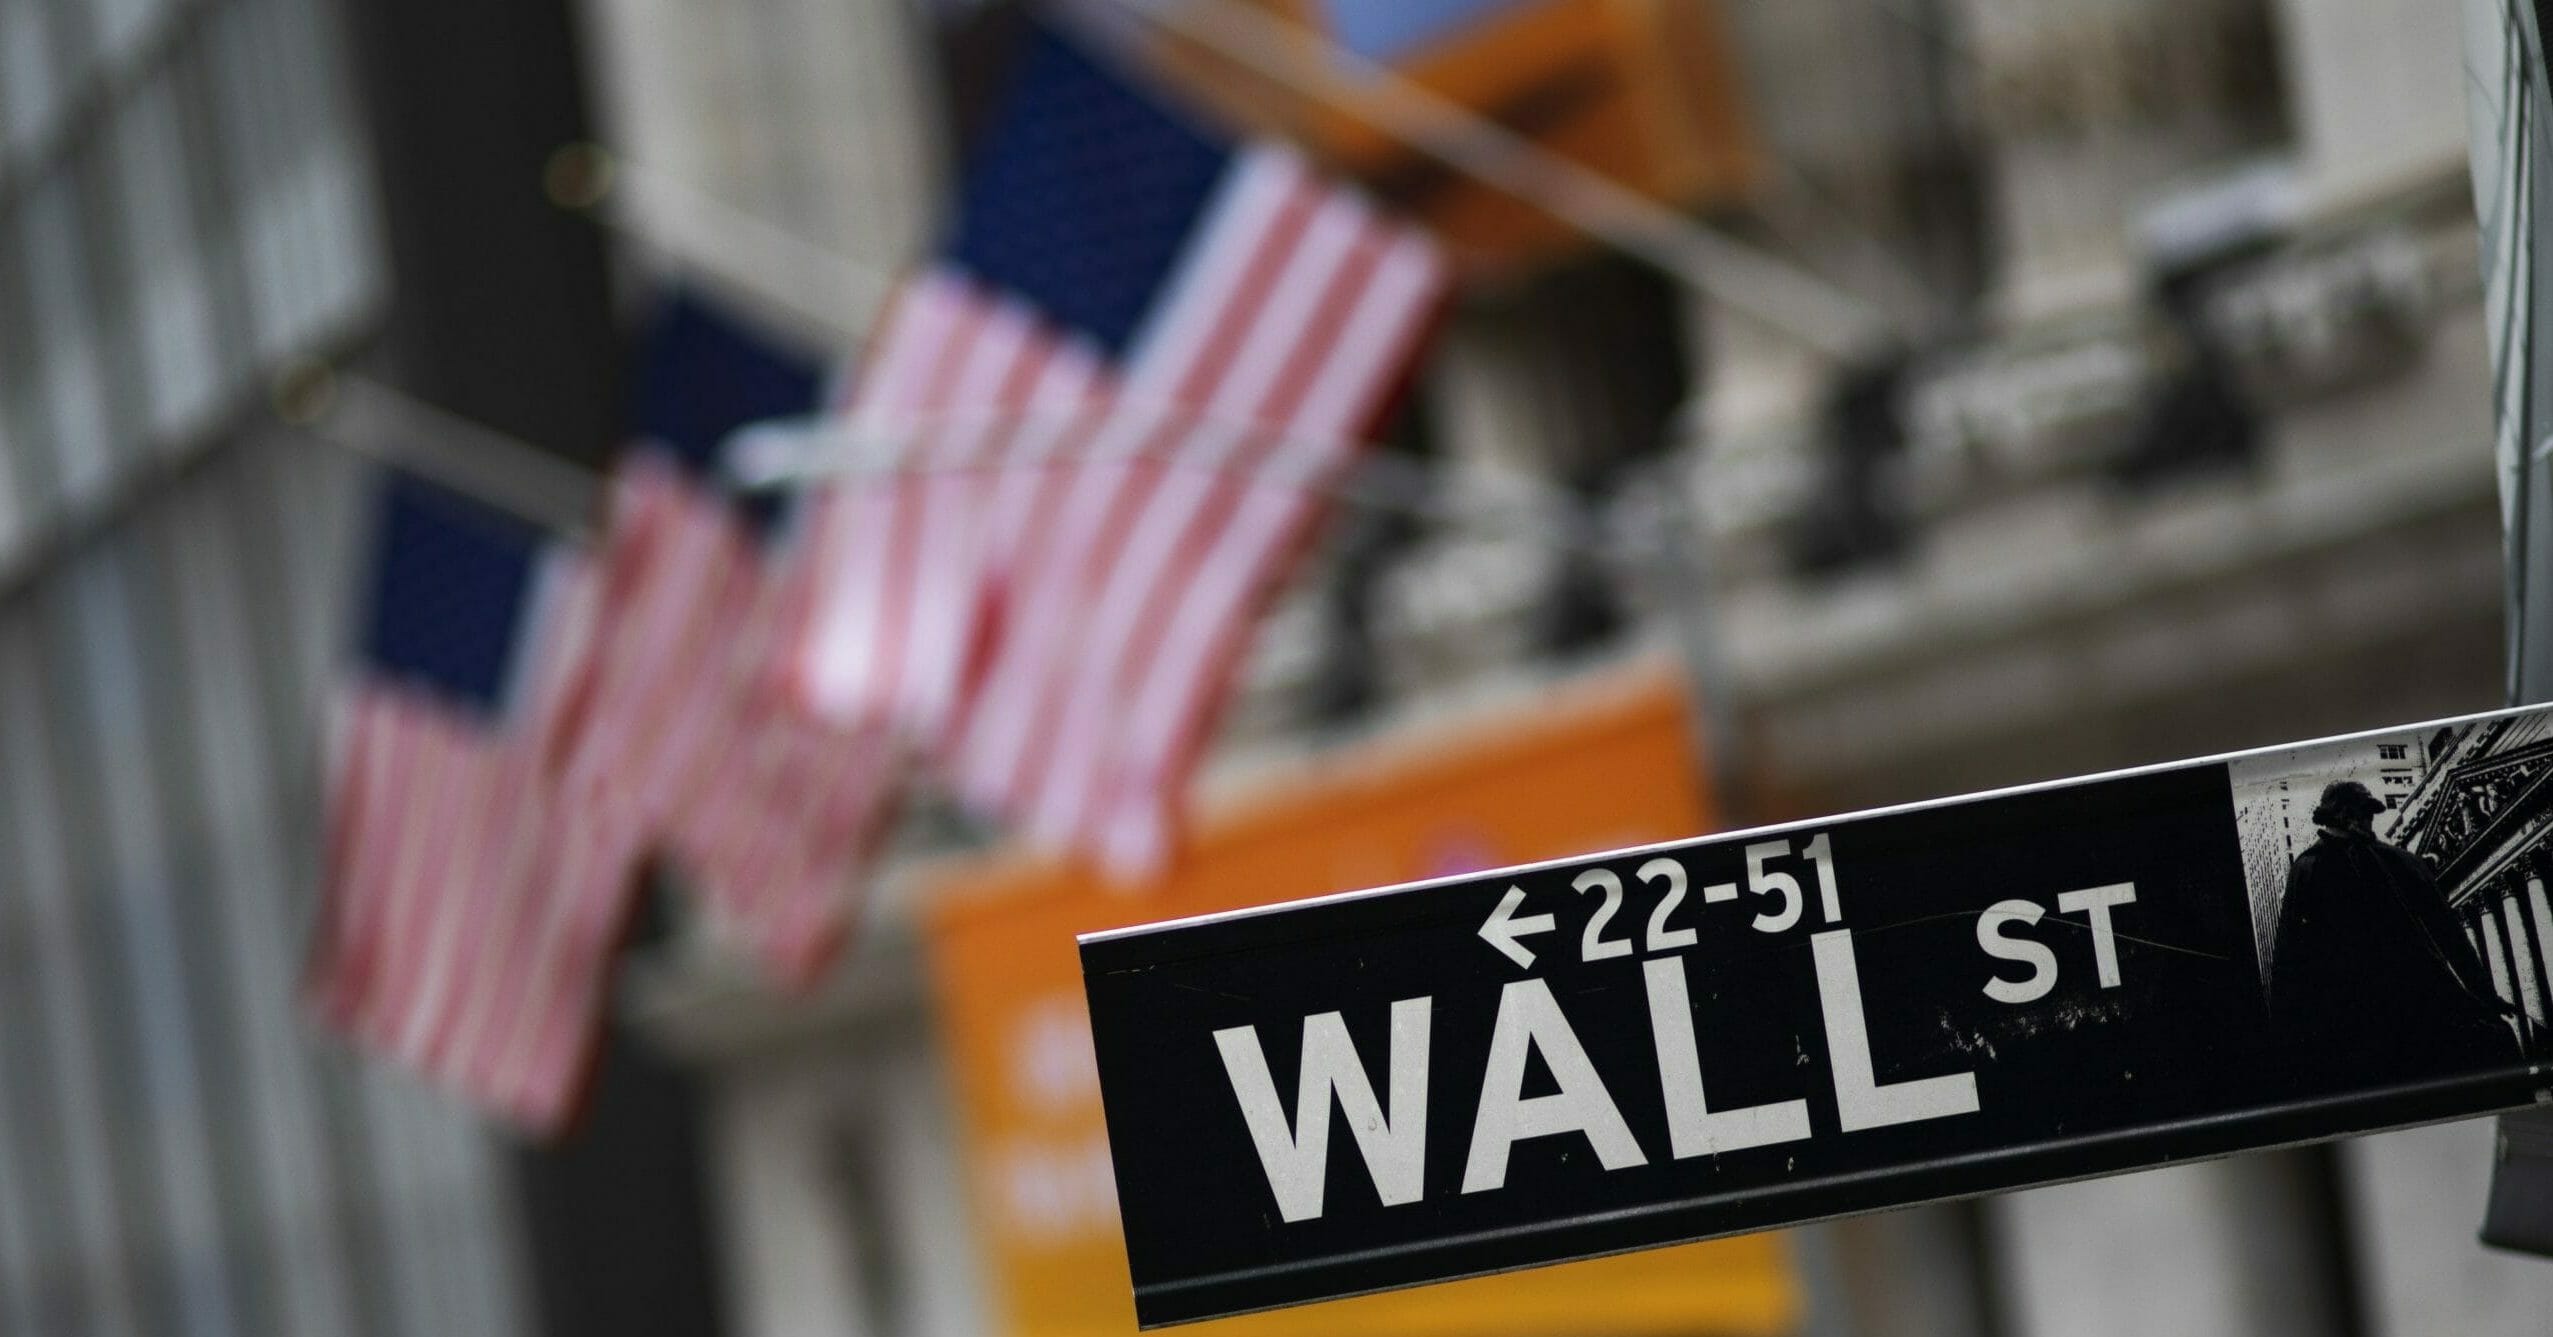 A Wall Street sign is seen in front of the New York Stock Exchange on Jan. 31, 2020.